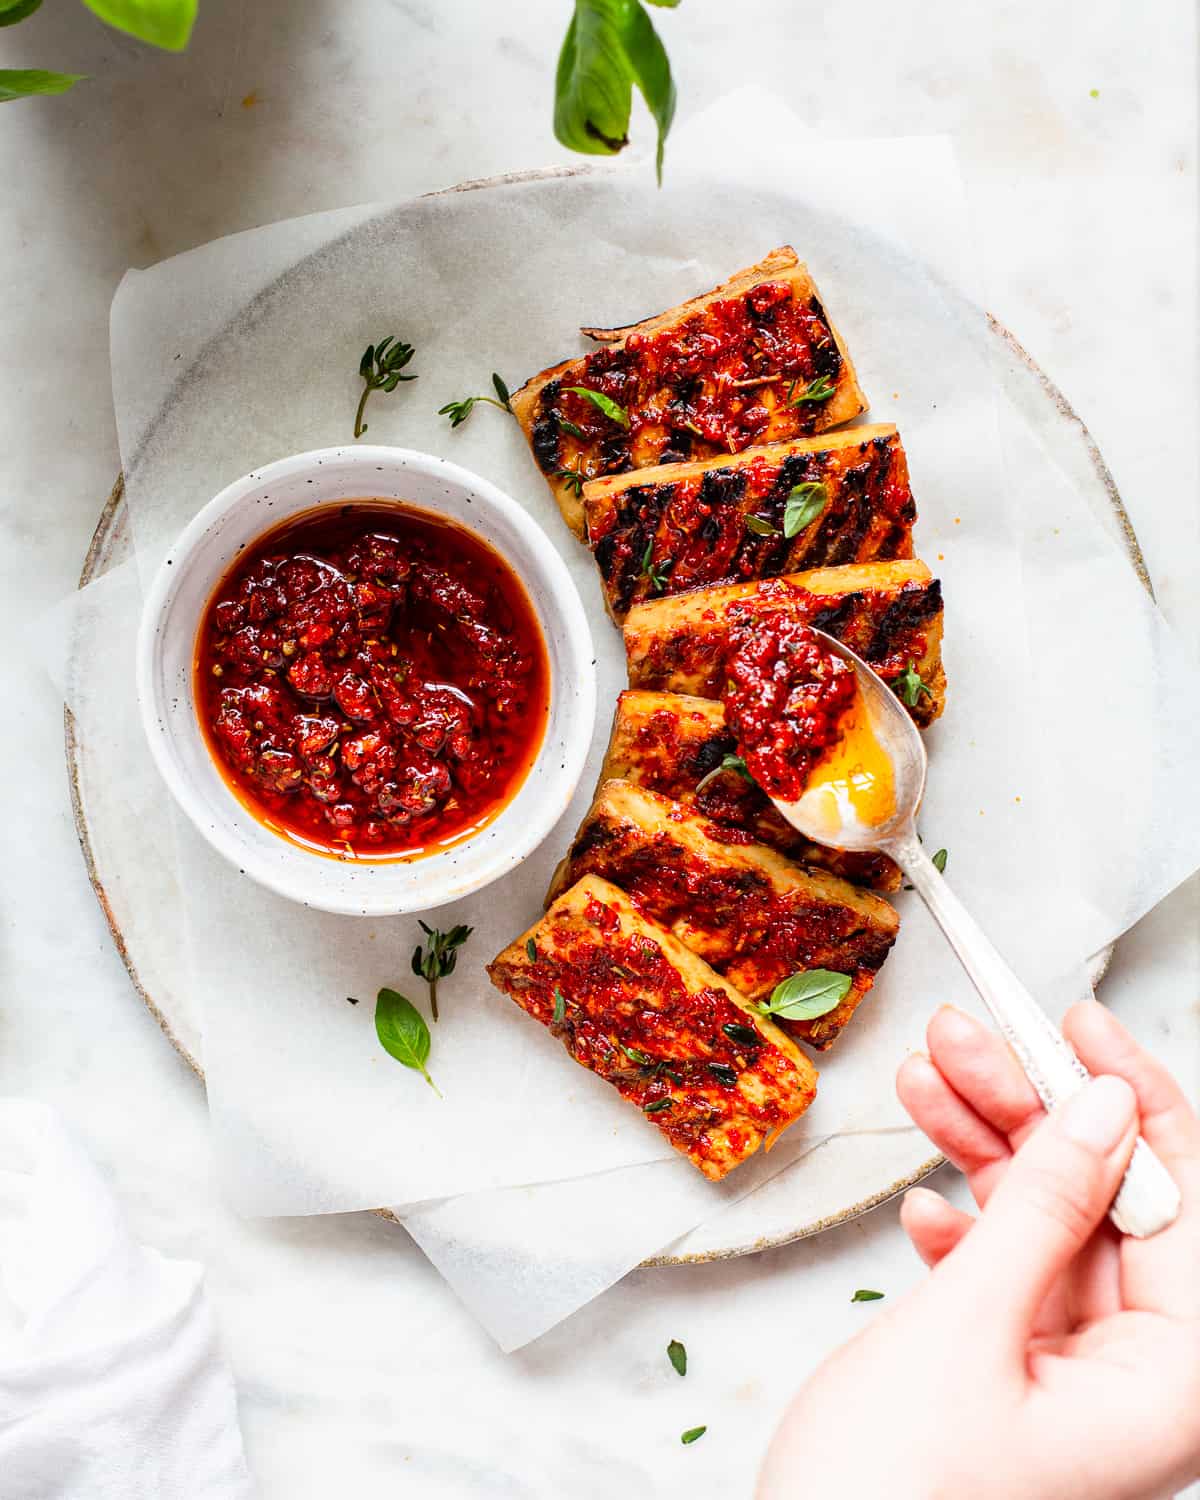 Hand adding a red harissa sauce onto tofu planks with a spoon.